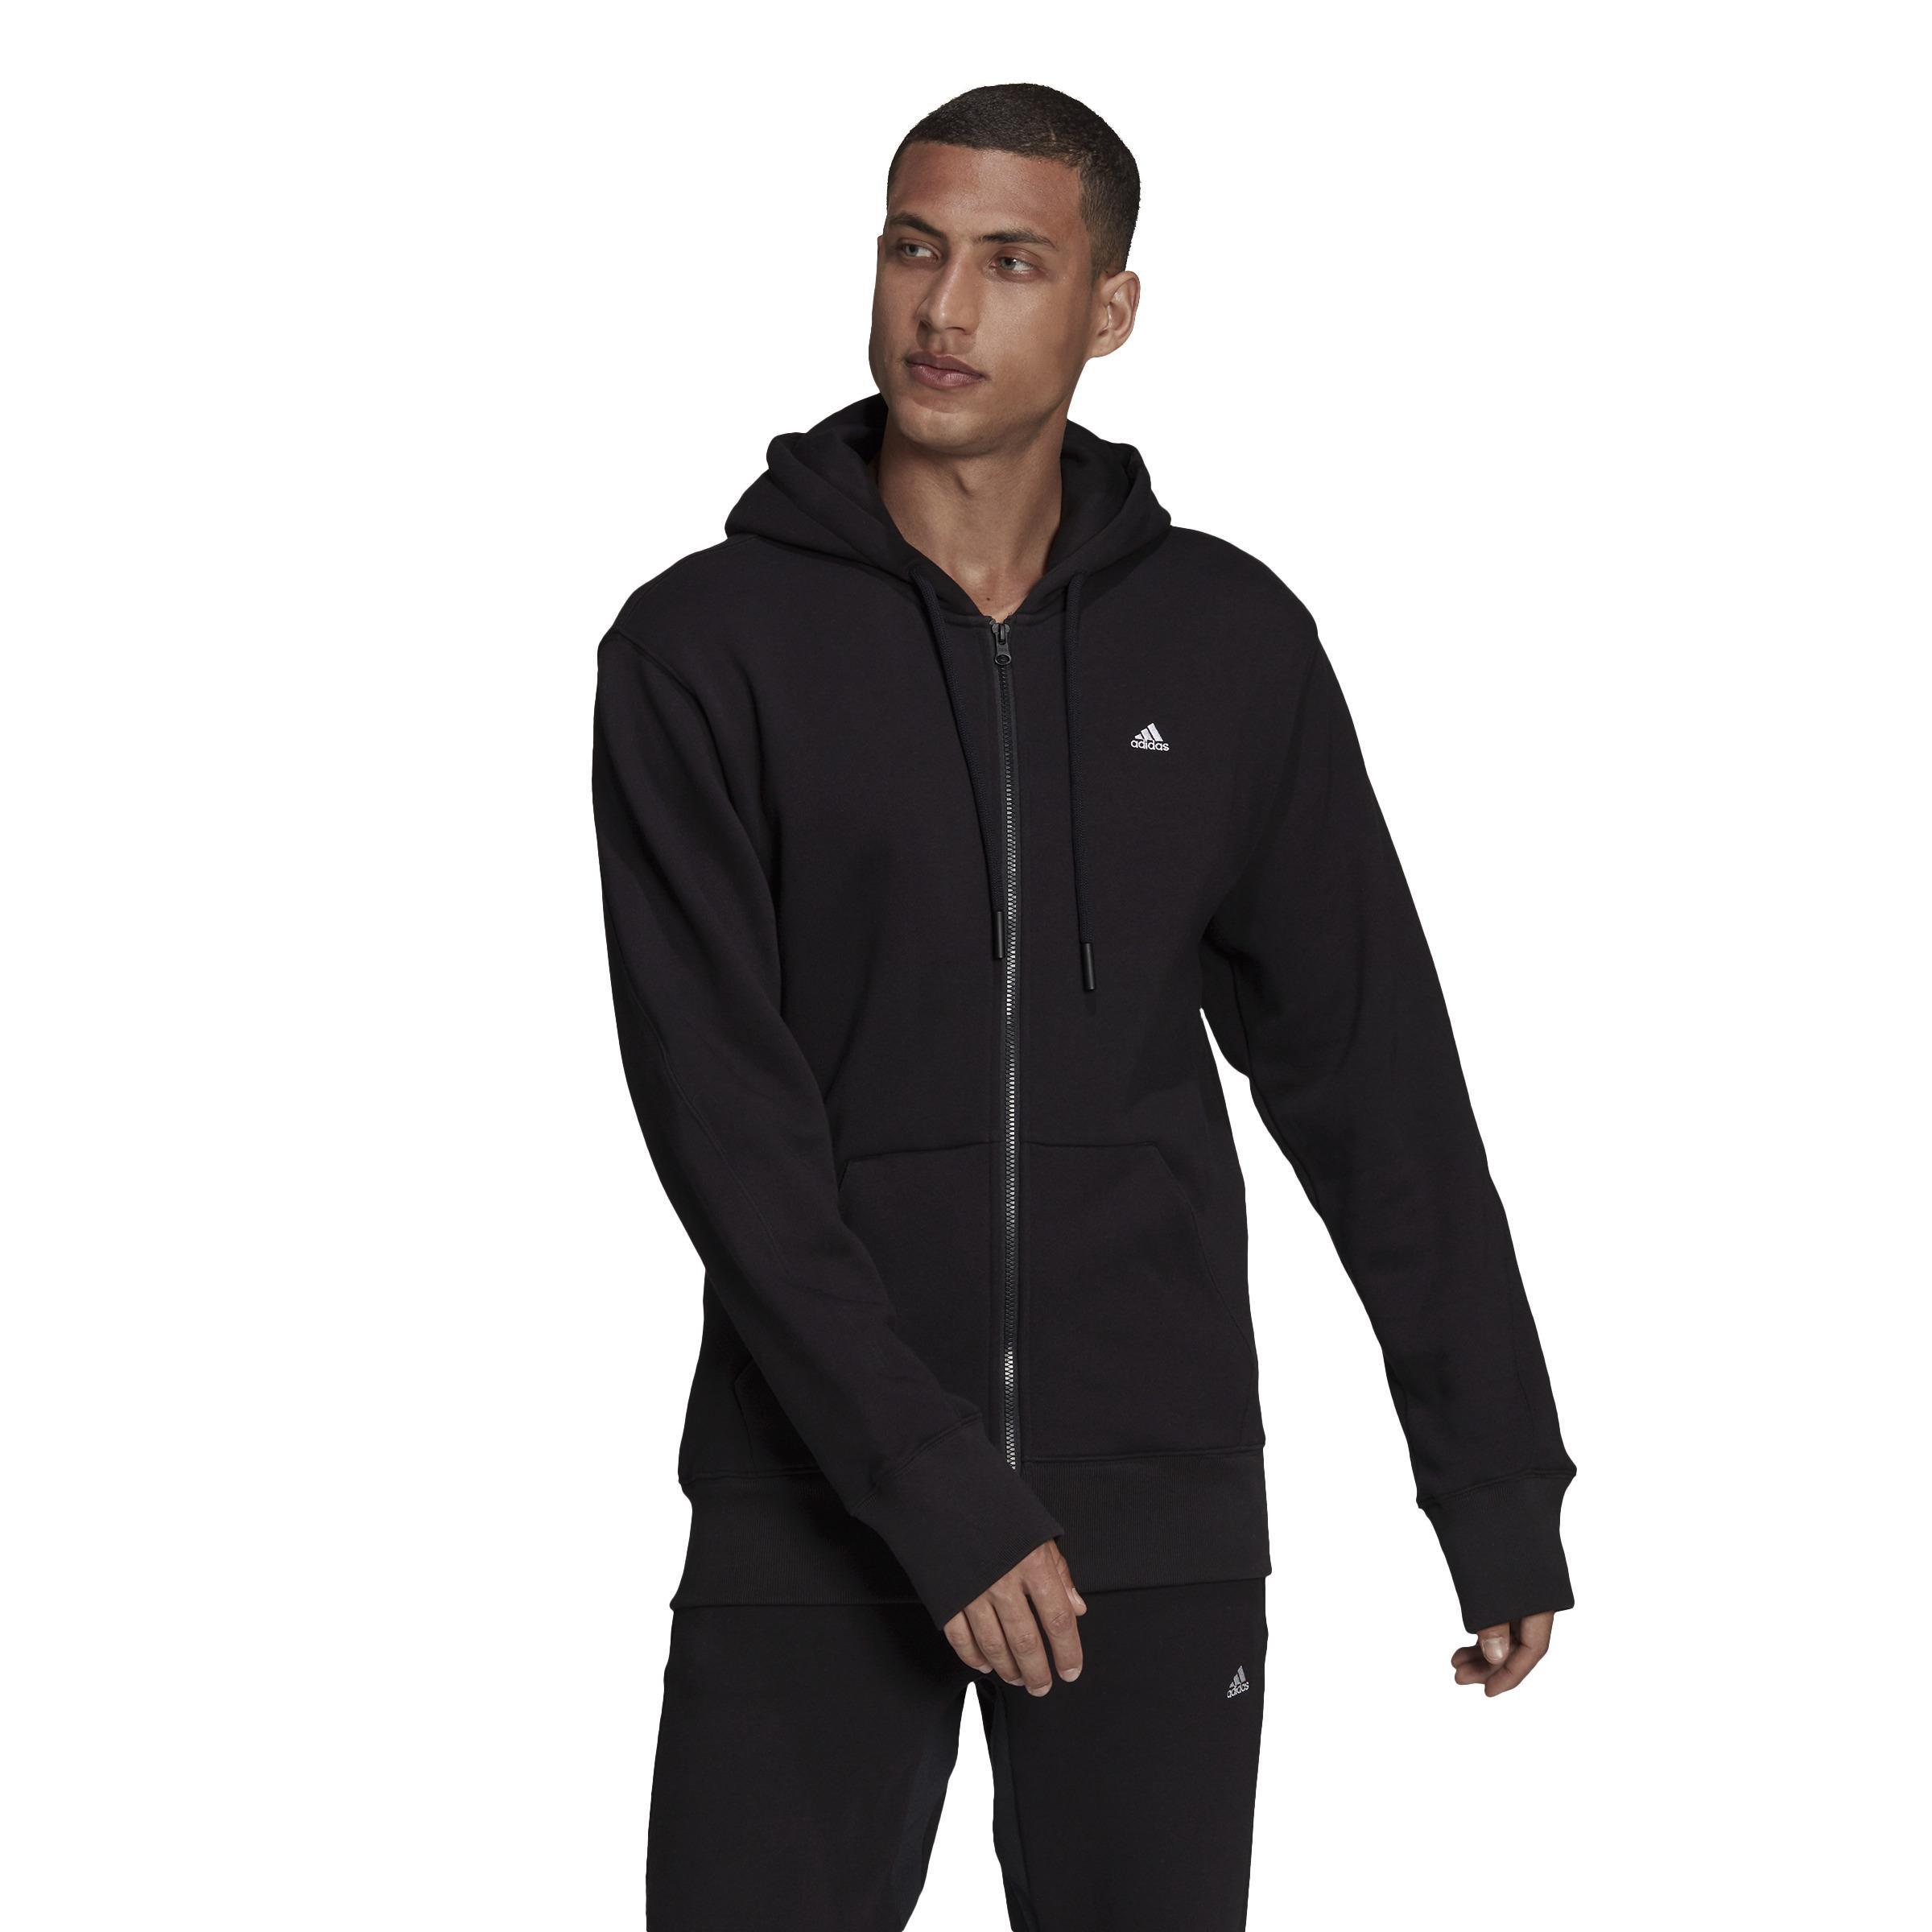 Men Sportswear Comfy And Chill Full Zip Hoodie, Black